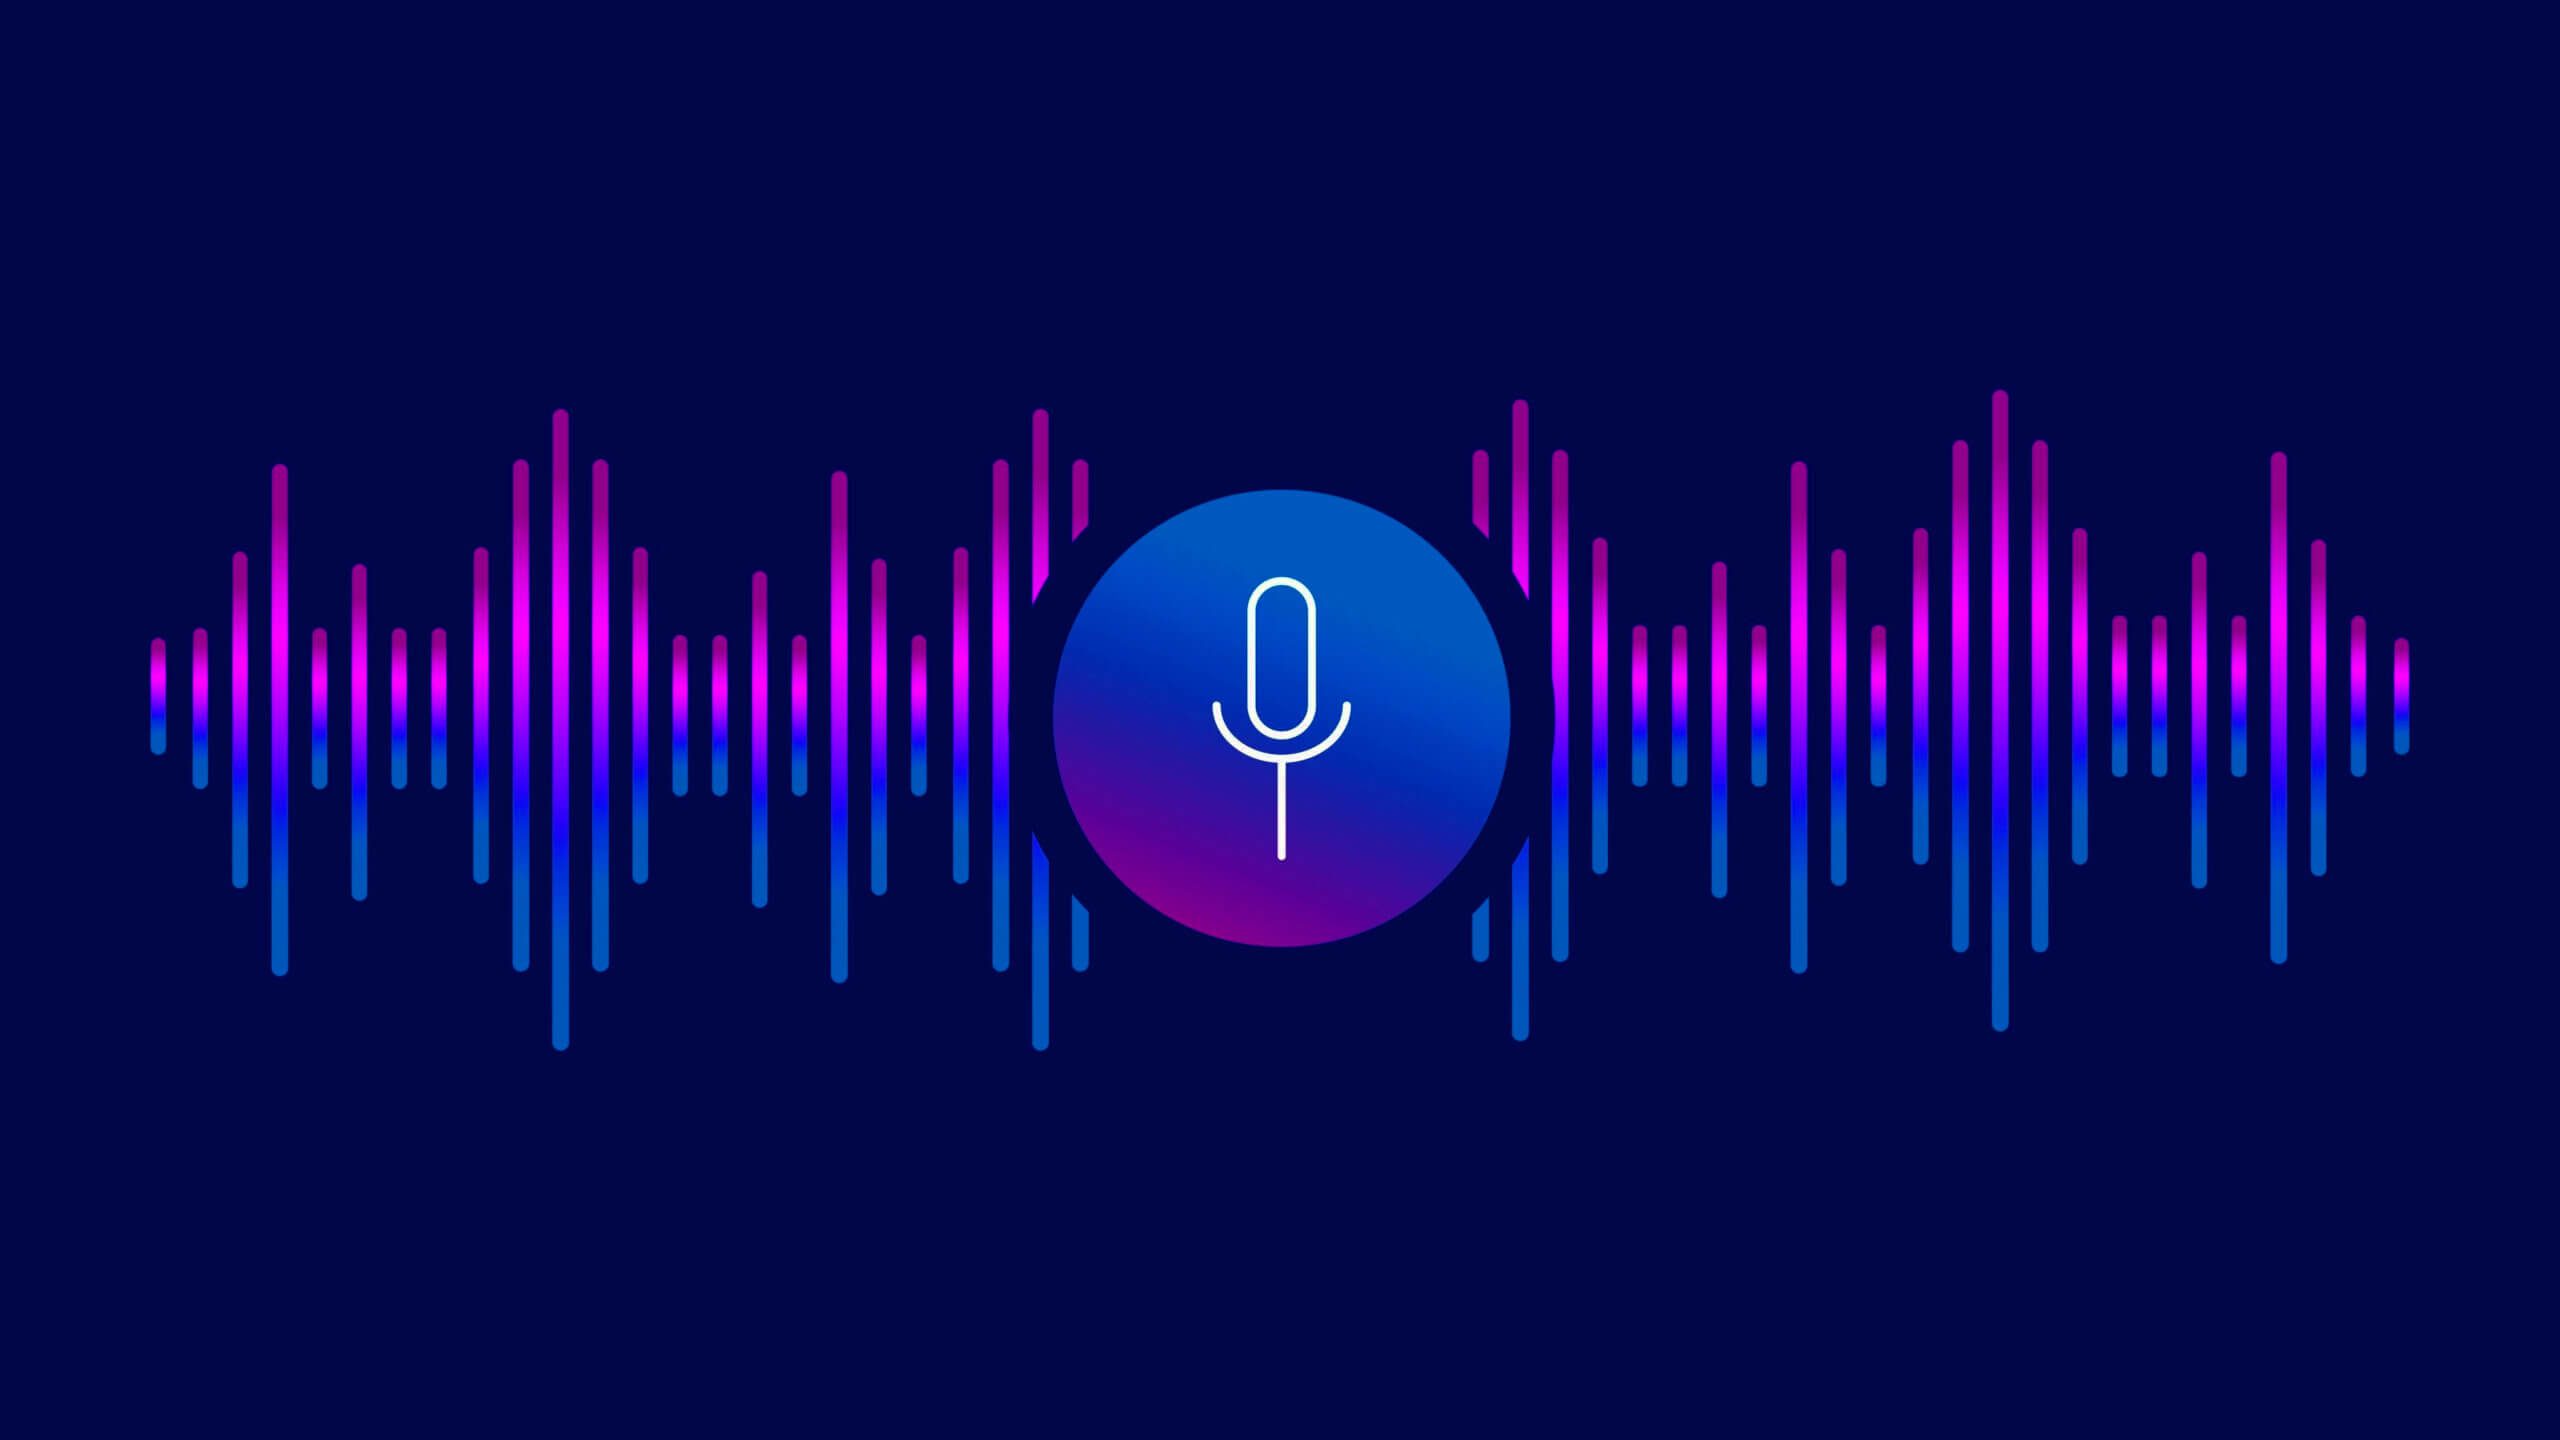 20 of the best cyber security podcasts to listen to now – Source: www.cybertalk.org